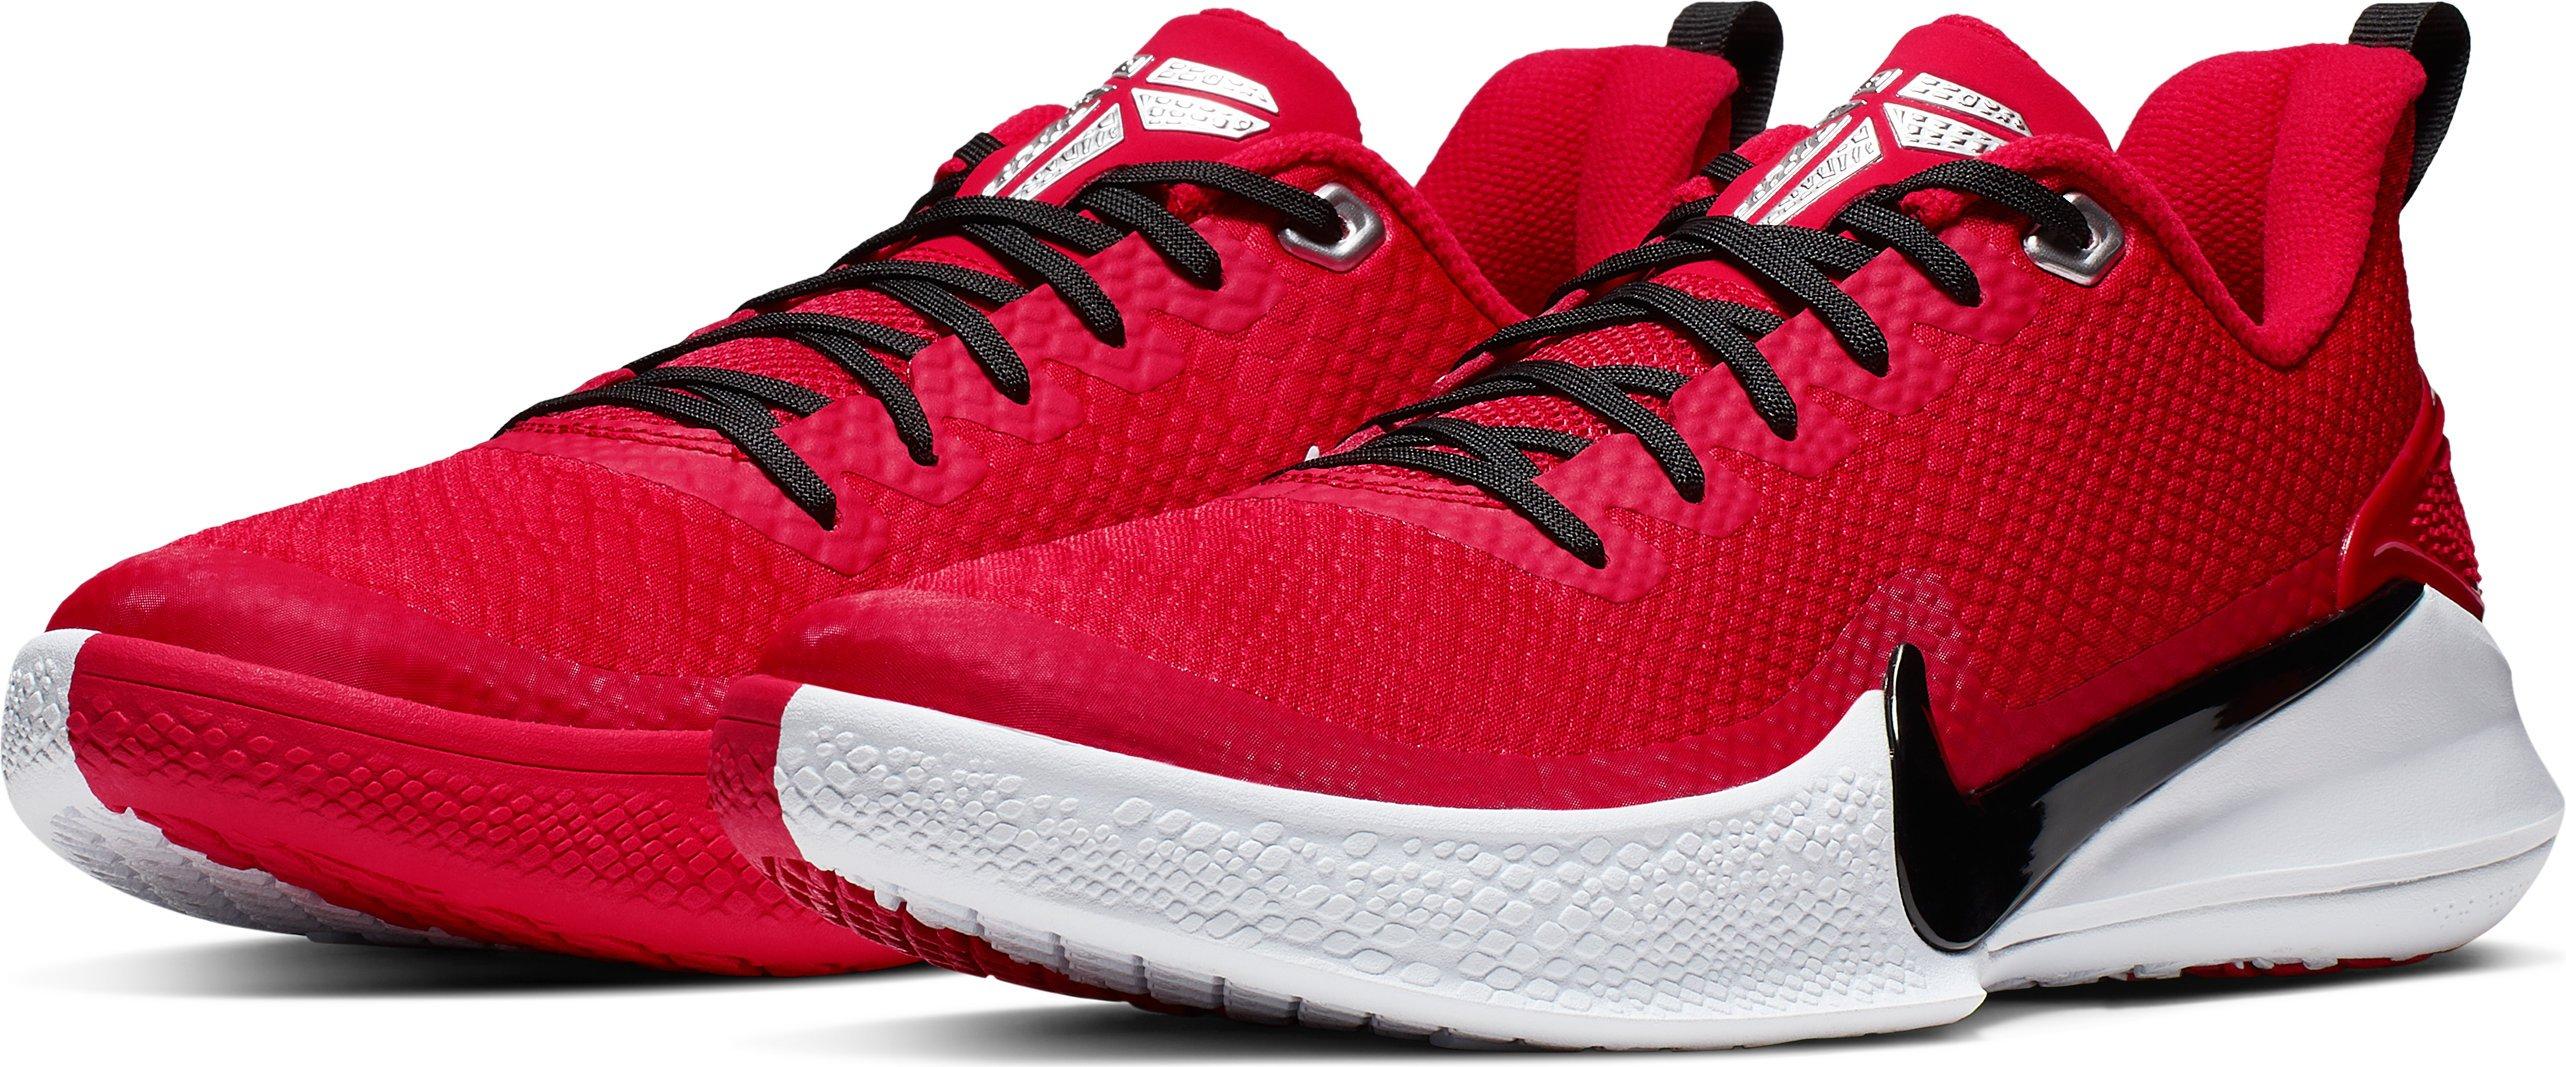 red mamba shoes